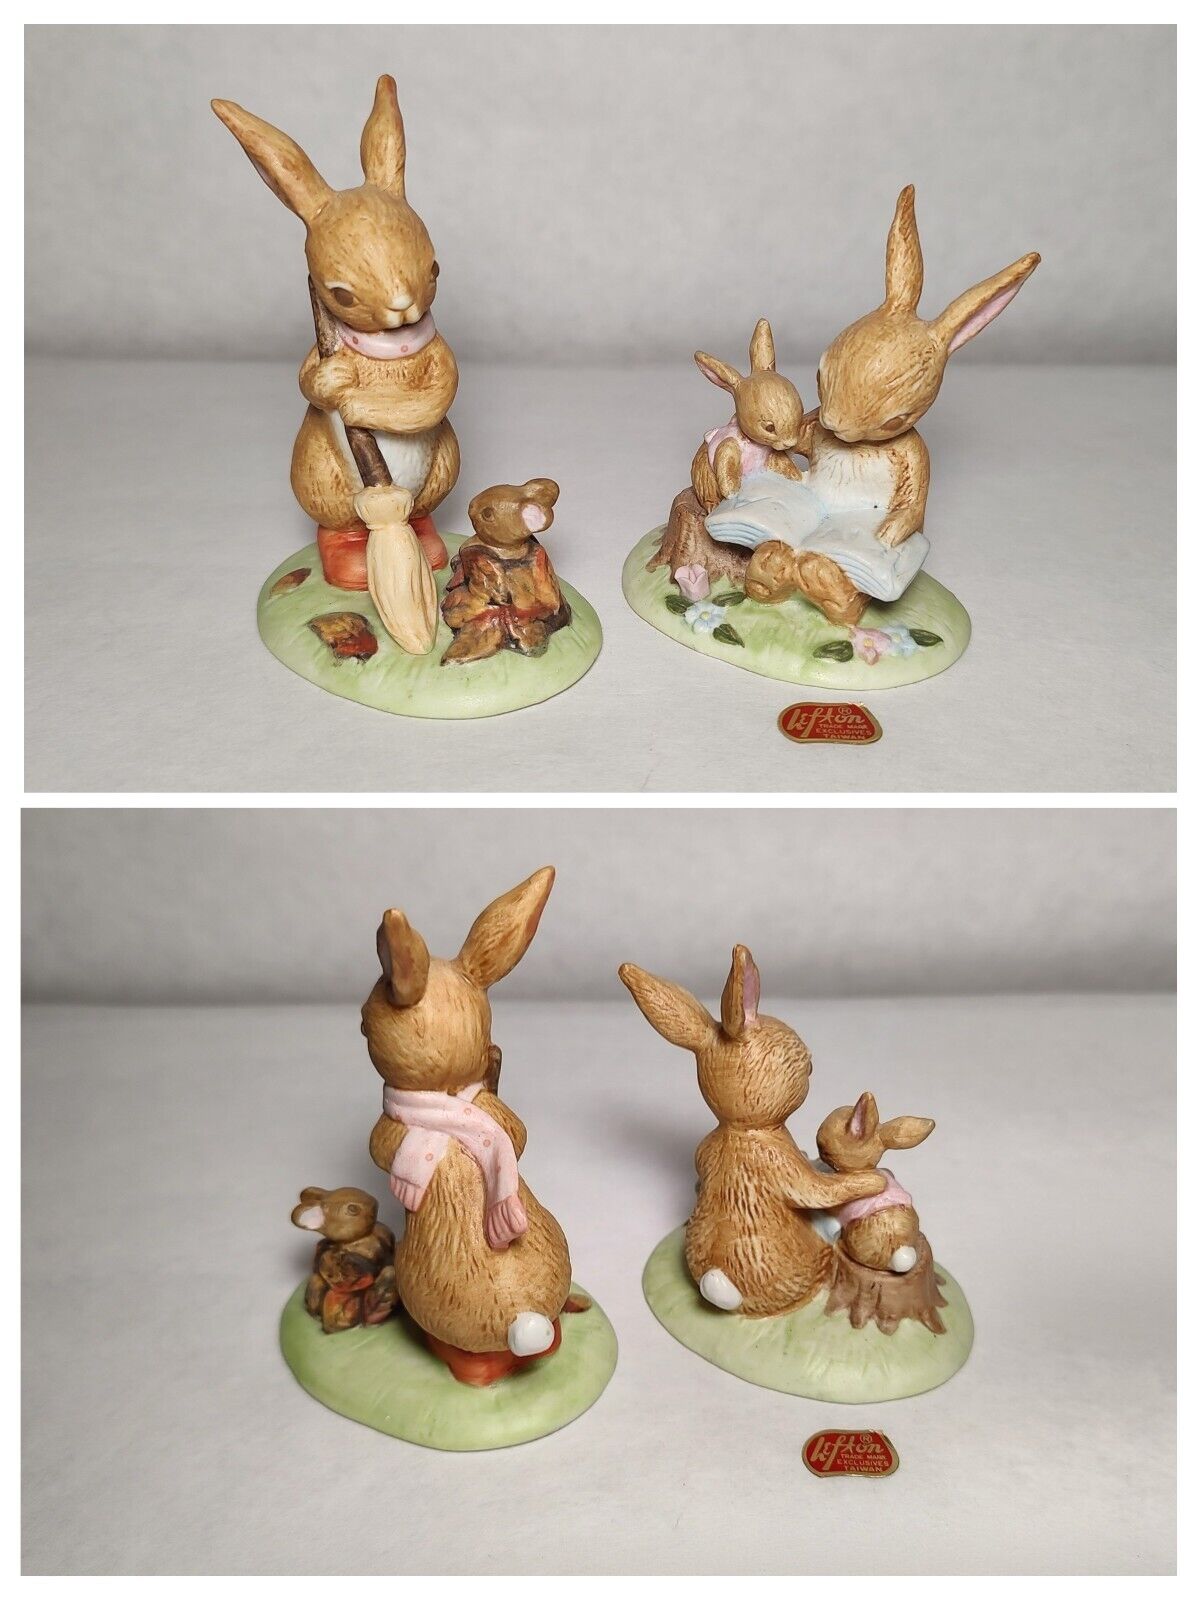 Lefton China Vintage Bunny Statues Easter #02889 Reading & Sweeping Porcelain